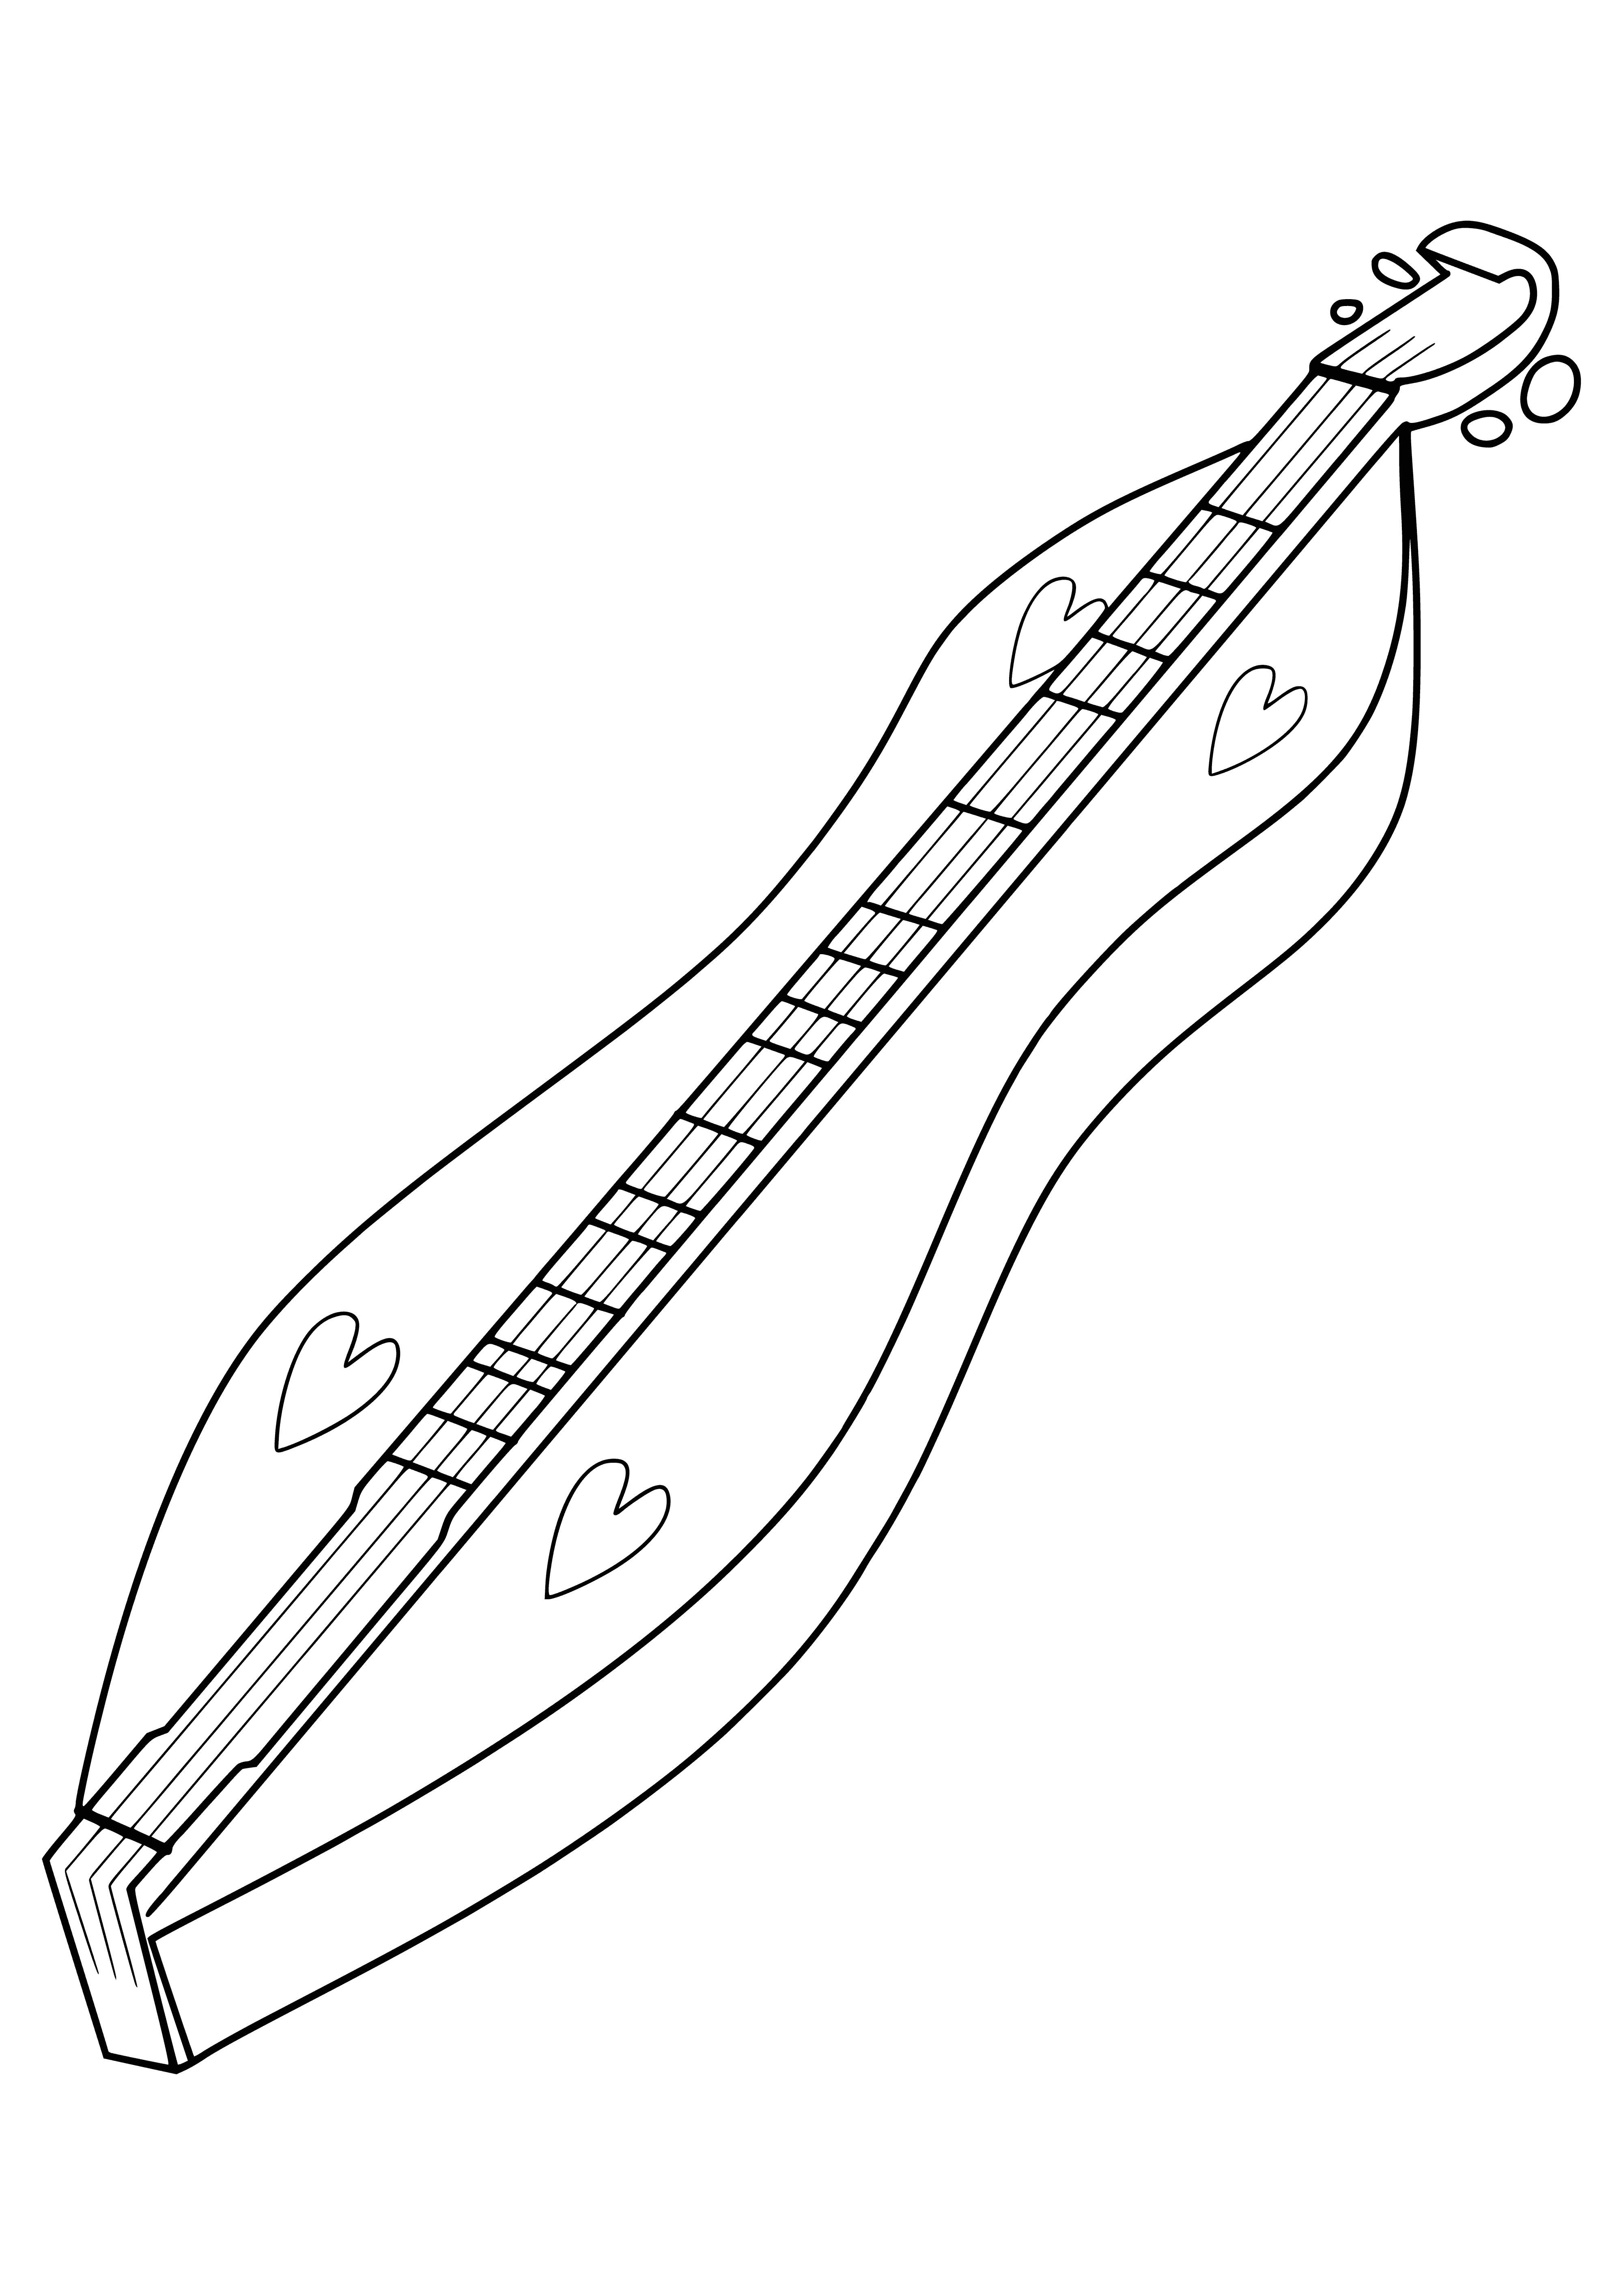 coloring page: A dulcimer is a musical instrument with a simple design, few strings and gentle sounds, used in folk music.